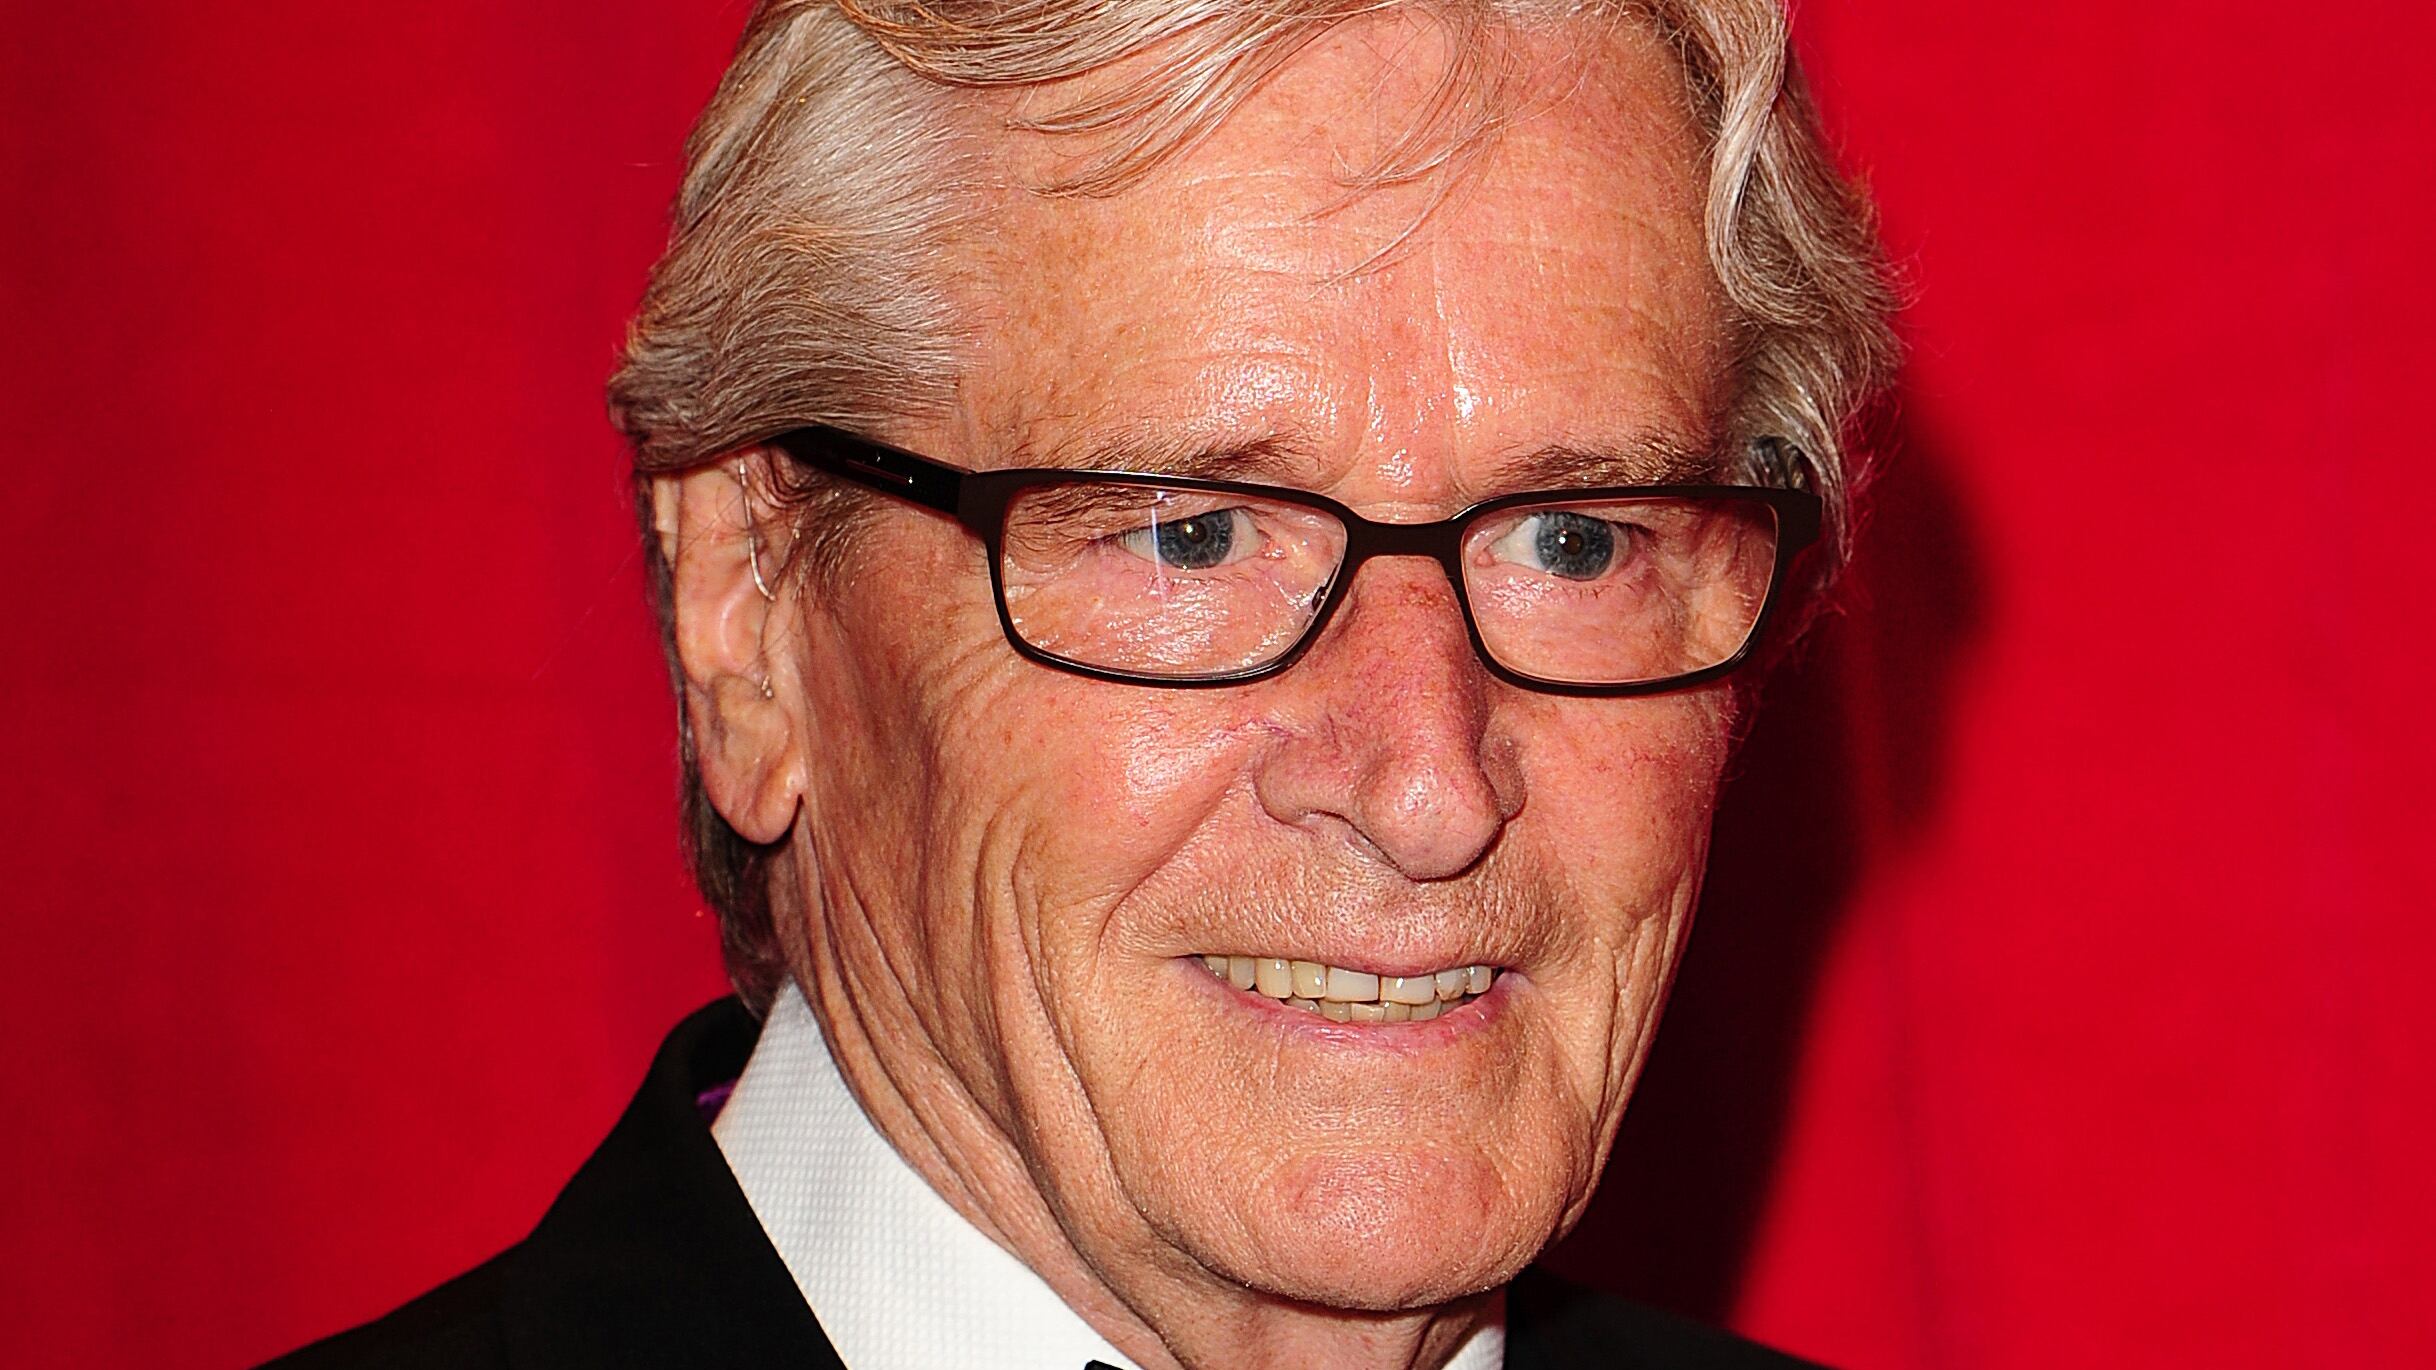 Coronation Street actor William Roache has settled his outstanding tax bill with HMRC